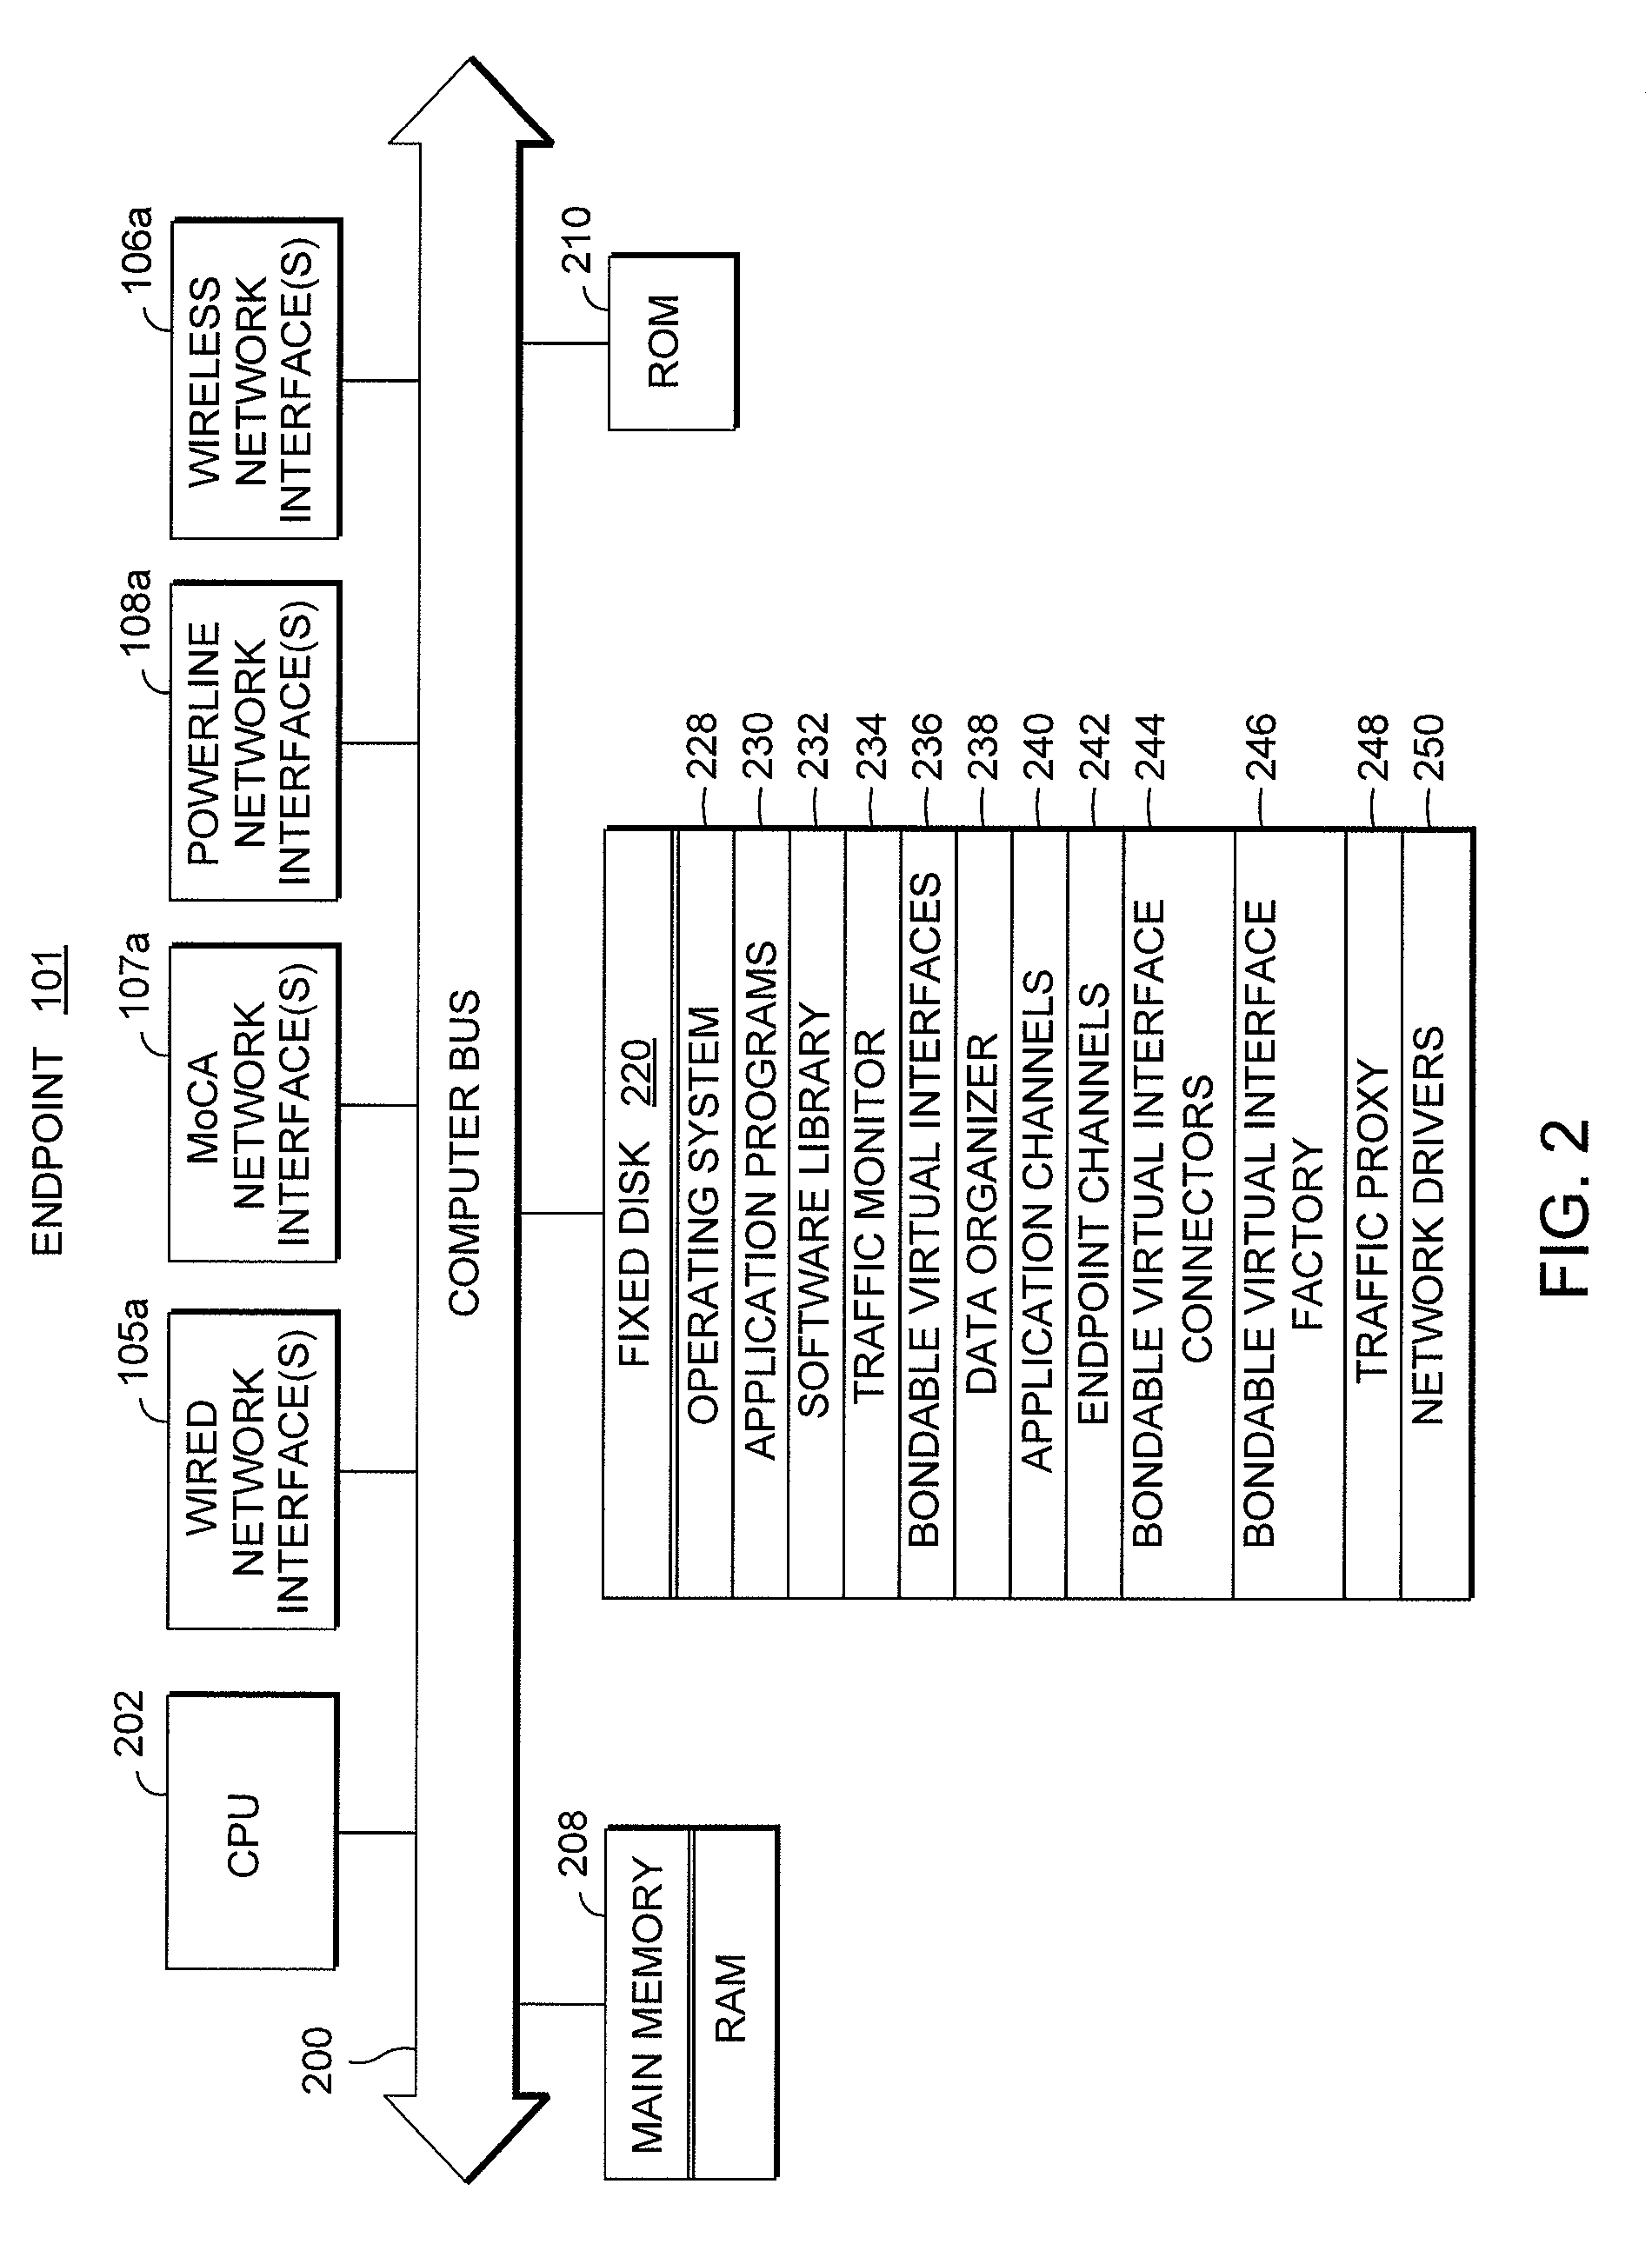 Network streaming of a single data stream simultaneously over multiple physical interfaces